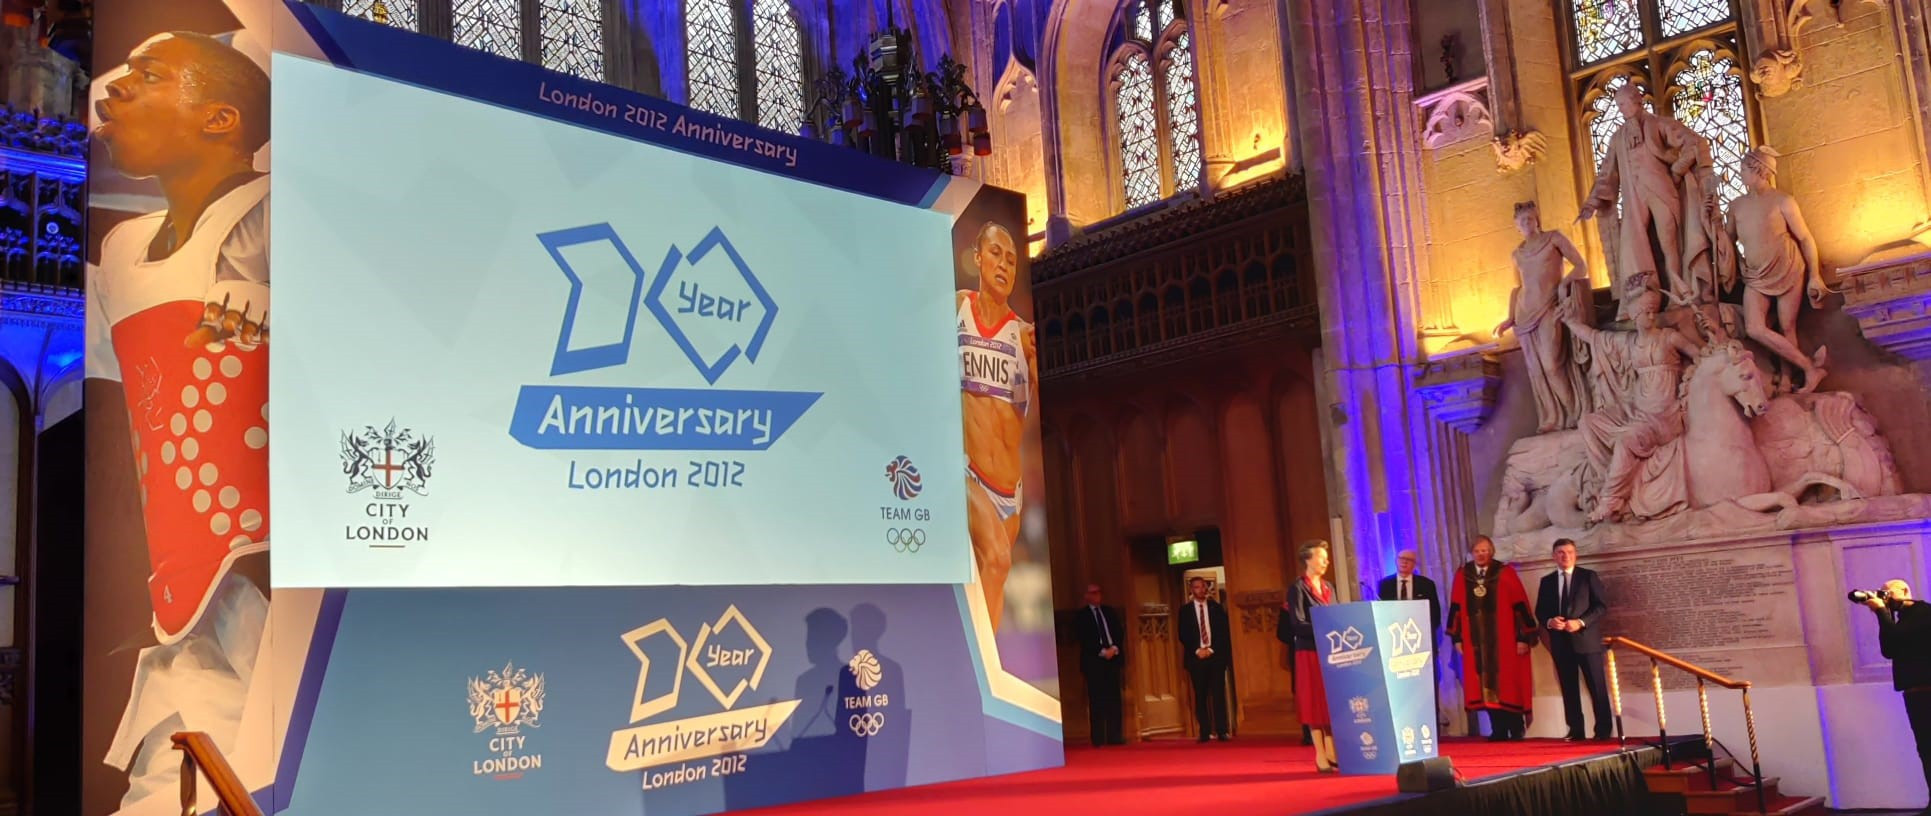 The Princess Royal praised everyone who had helped make London 2012 so successful during a speech at the Guildhall ©ITG